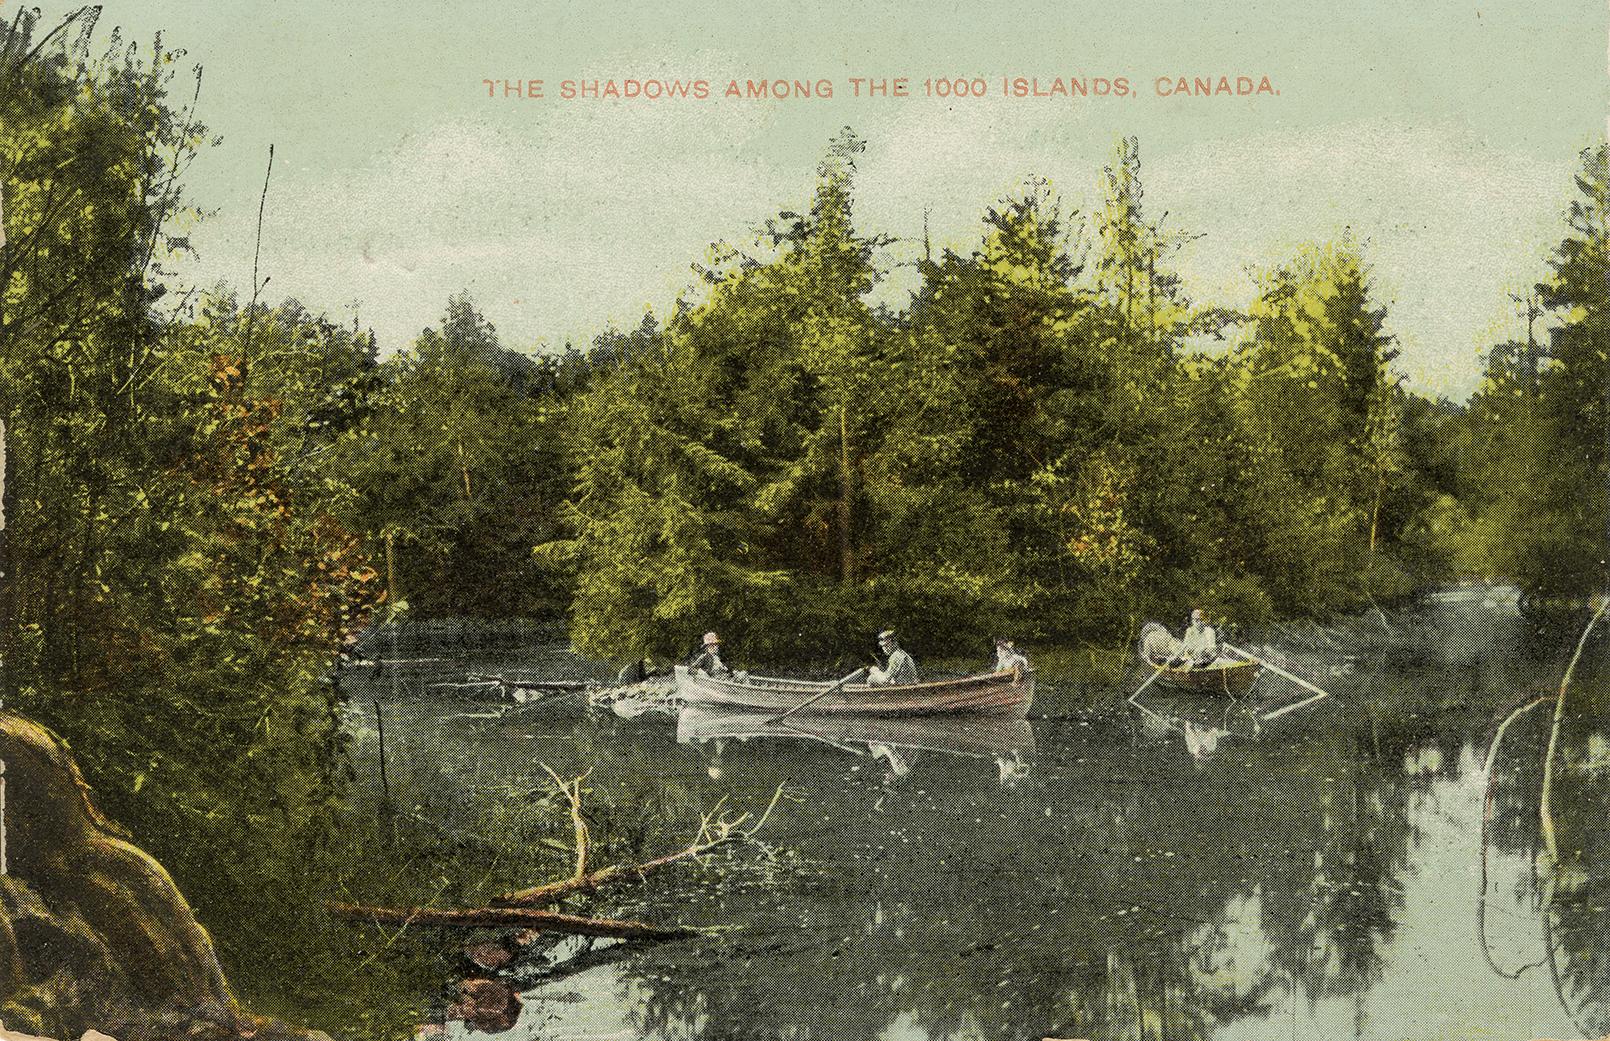 Colorized photograph of of people in two rowboats in front of densely forested islands in a riv ...